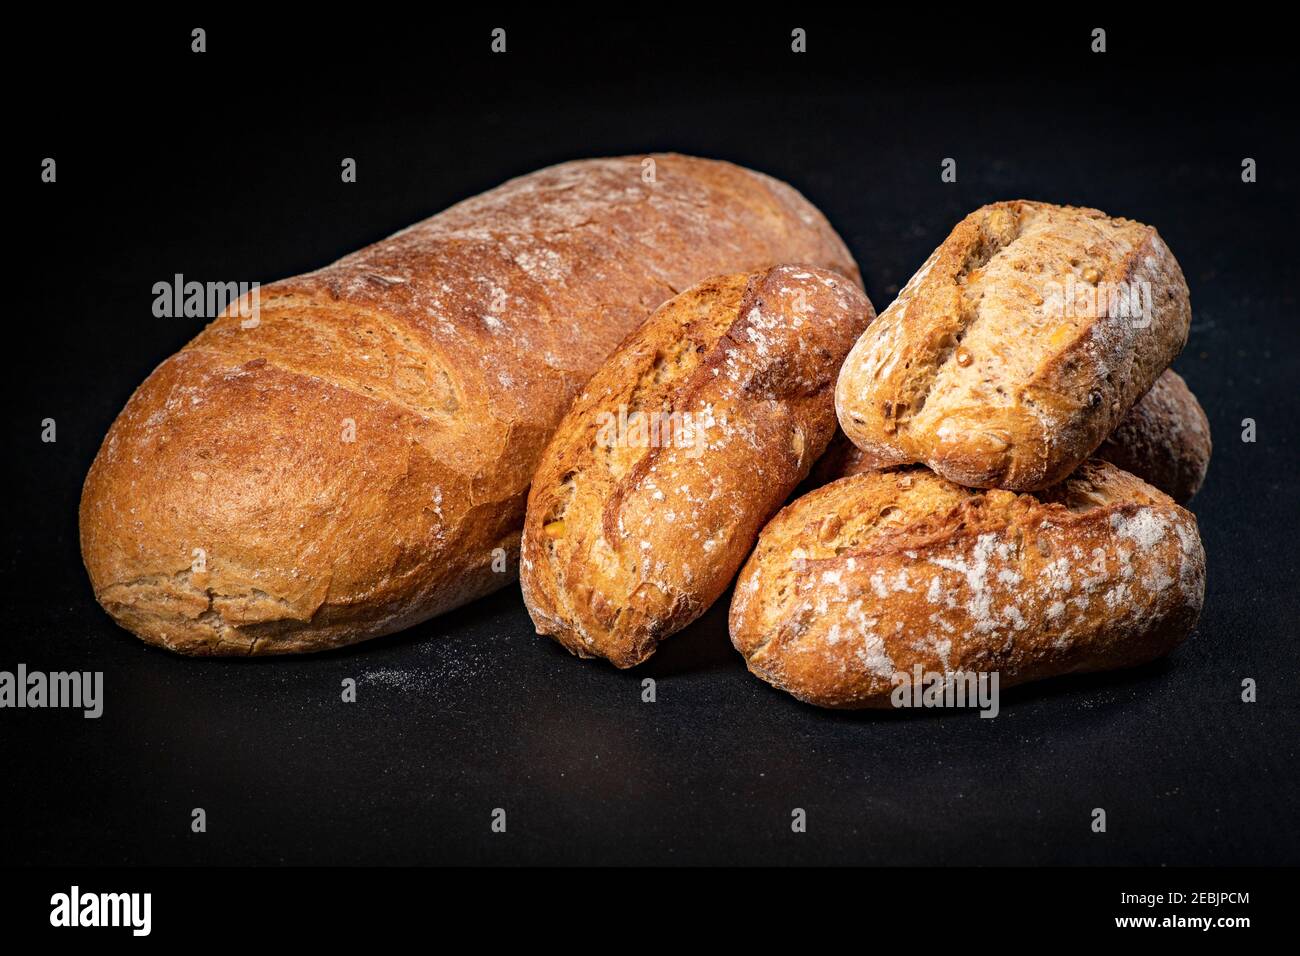 Fresh bread and rolls on a black kitchen table. Bread prepared for serving. Dark background. Stock Photo